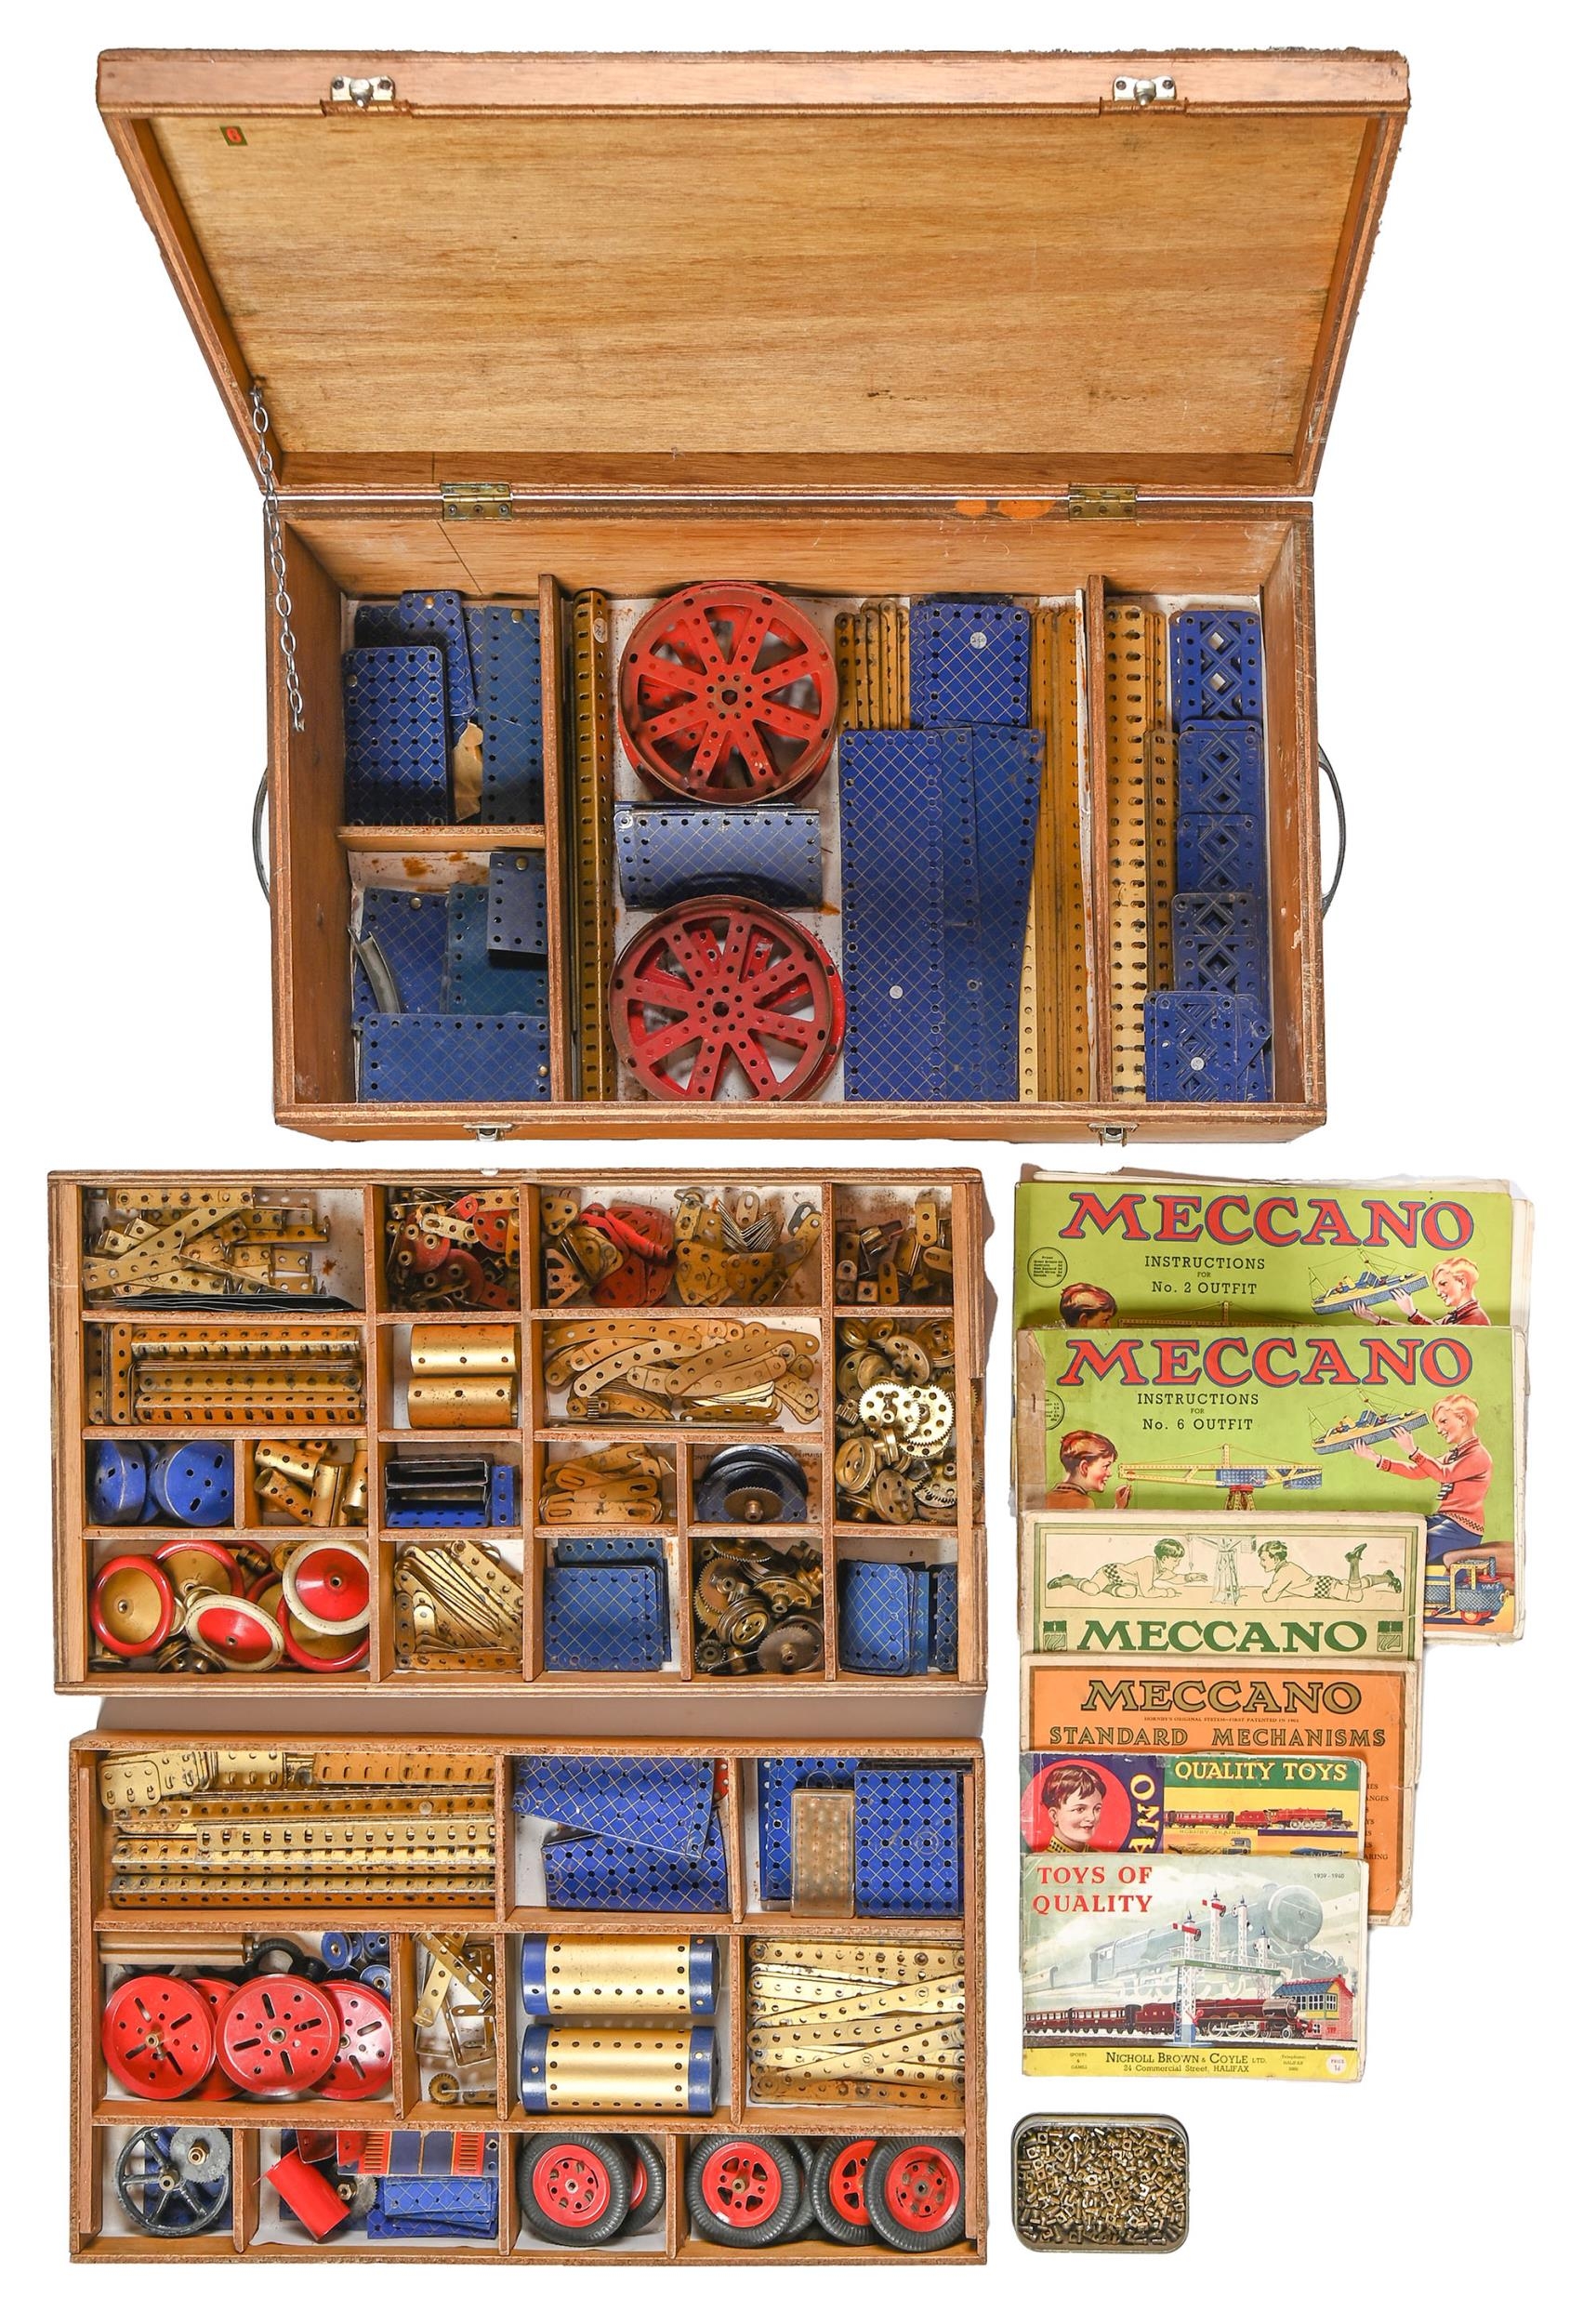 A collection of Meccano, c1930’s, blue and gold, and several contemporary printed instruction books